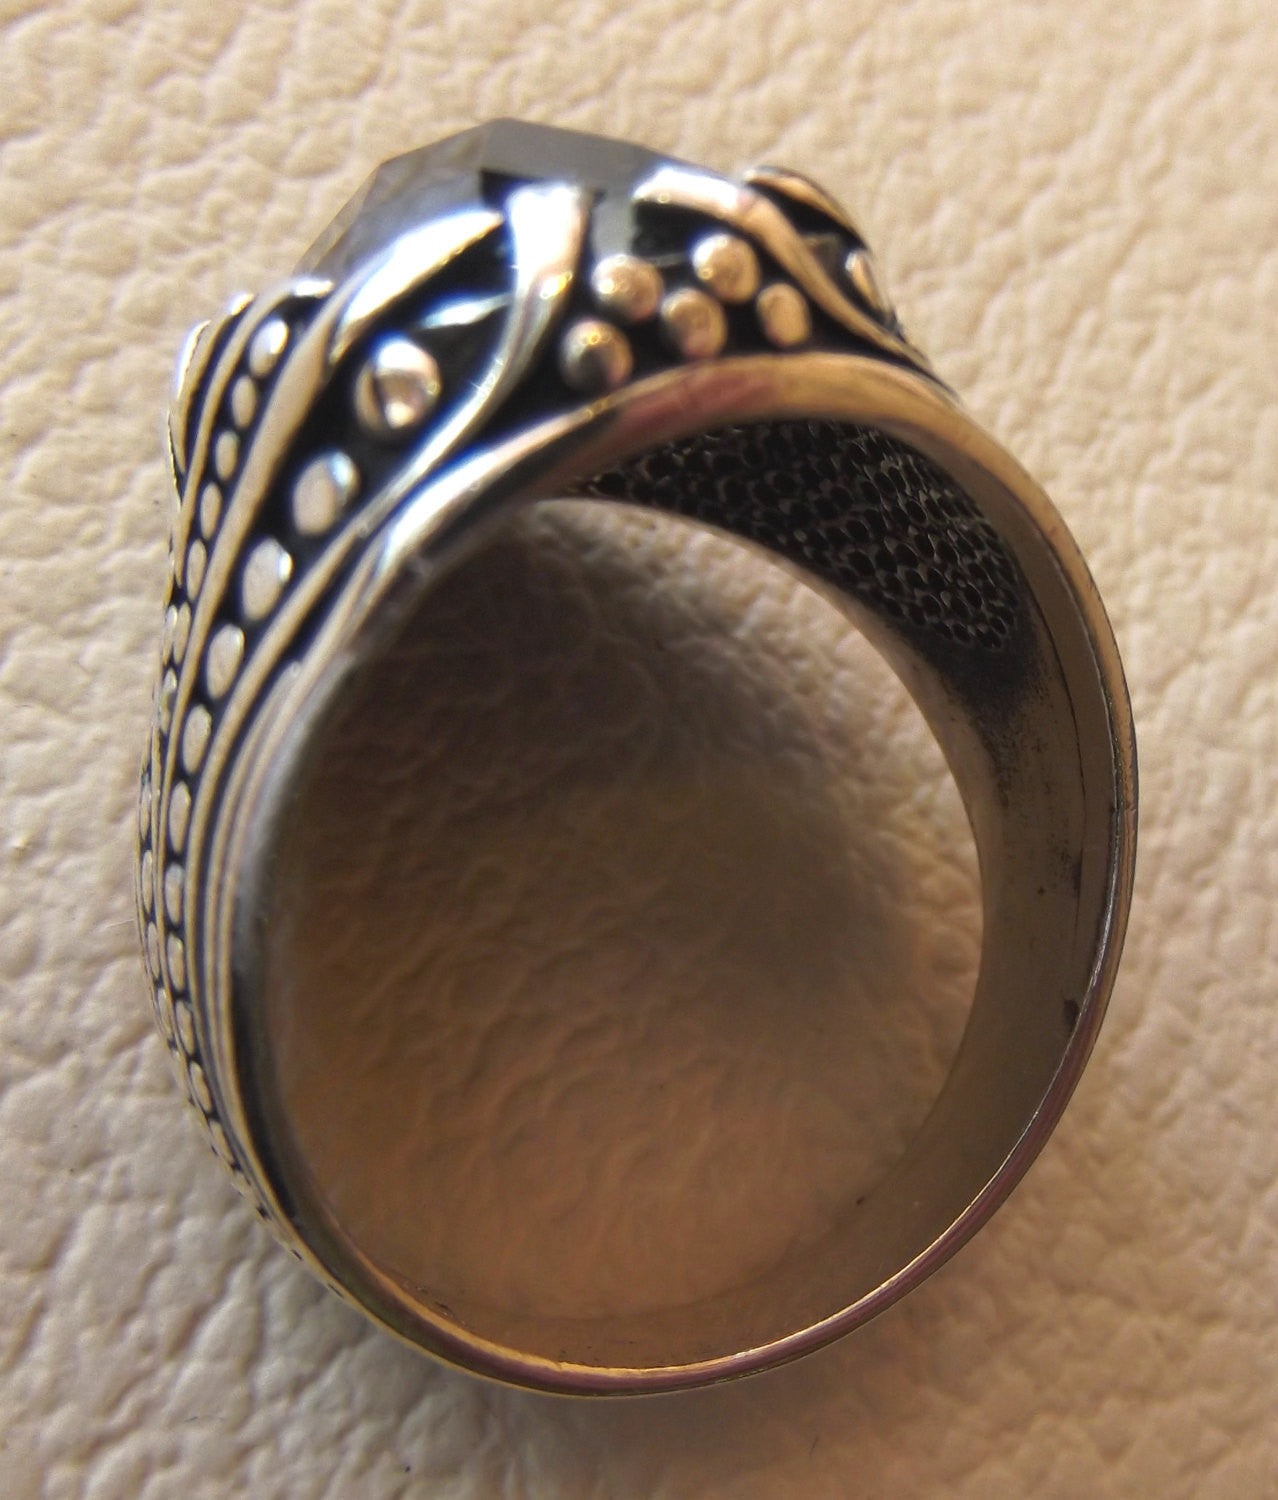 men ring black white sterling silver 925 all sizes jewelry oval cabochon onyx stone middle eastern oriental Ottoman arabic turkish style